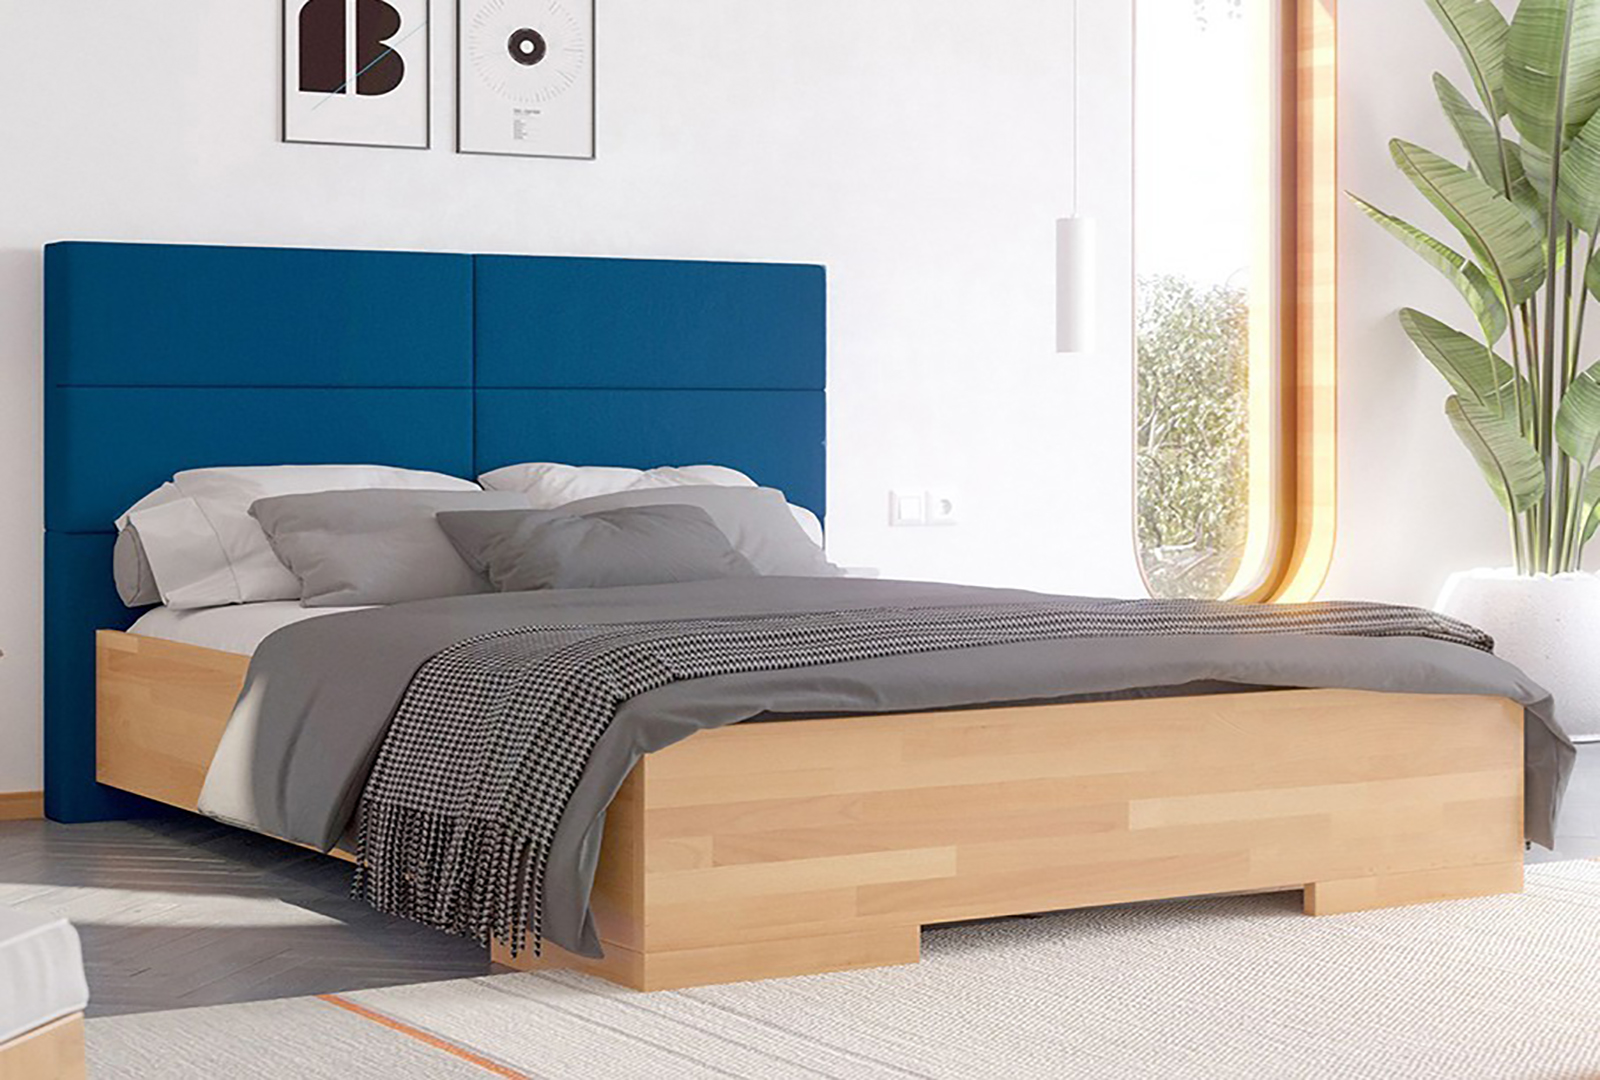 VISBY BERG WOODEN BEECH BED WITH AN UPHOLSTERED HEADBOARD 2